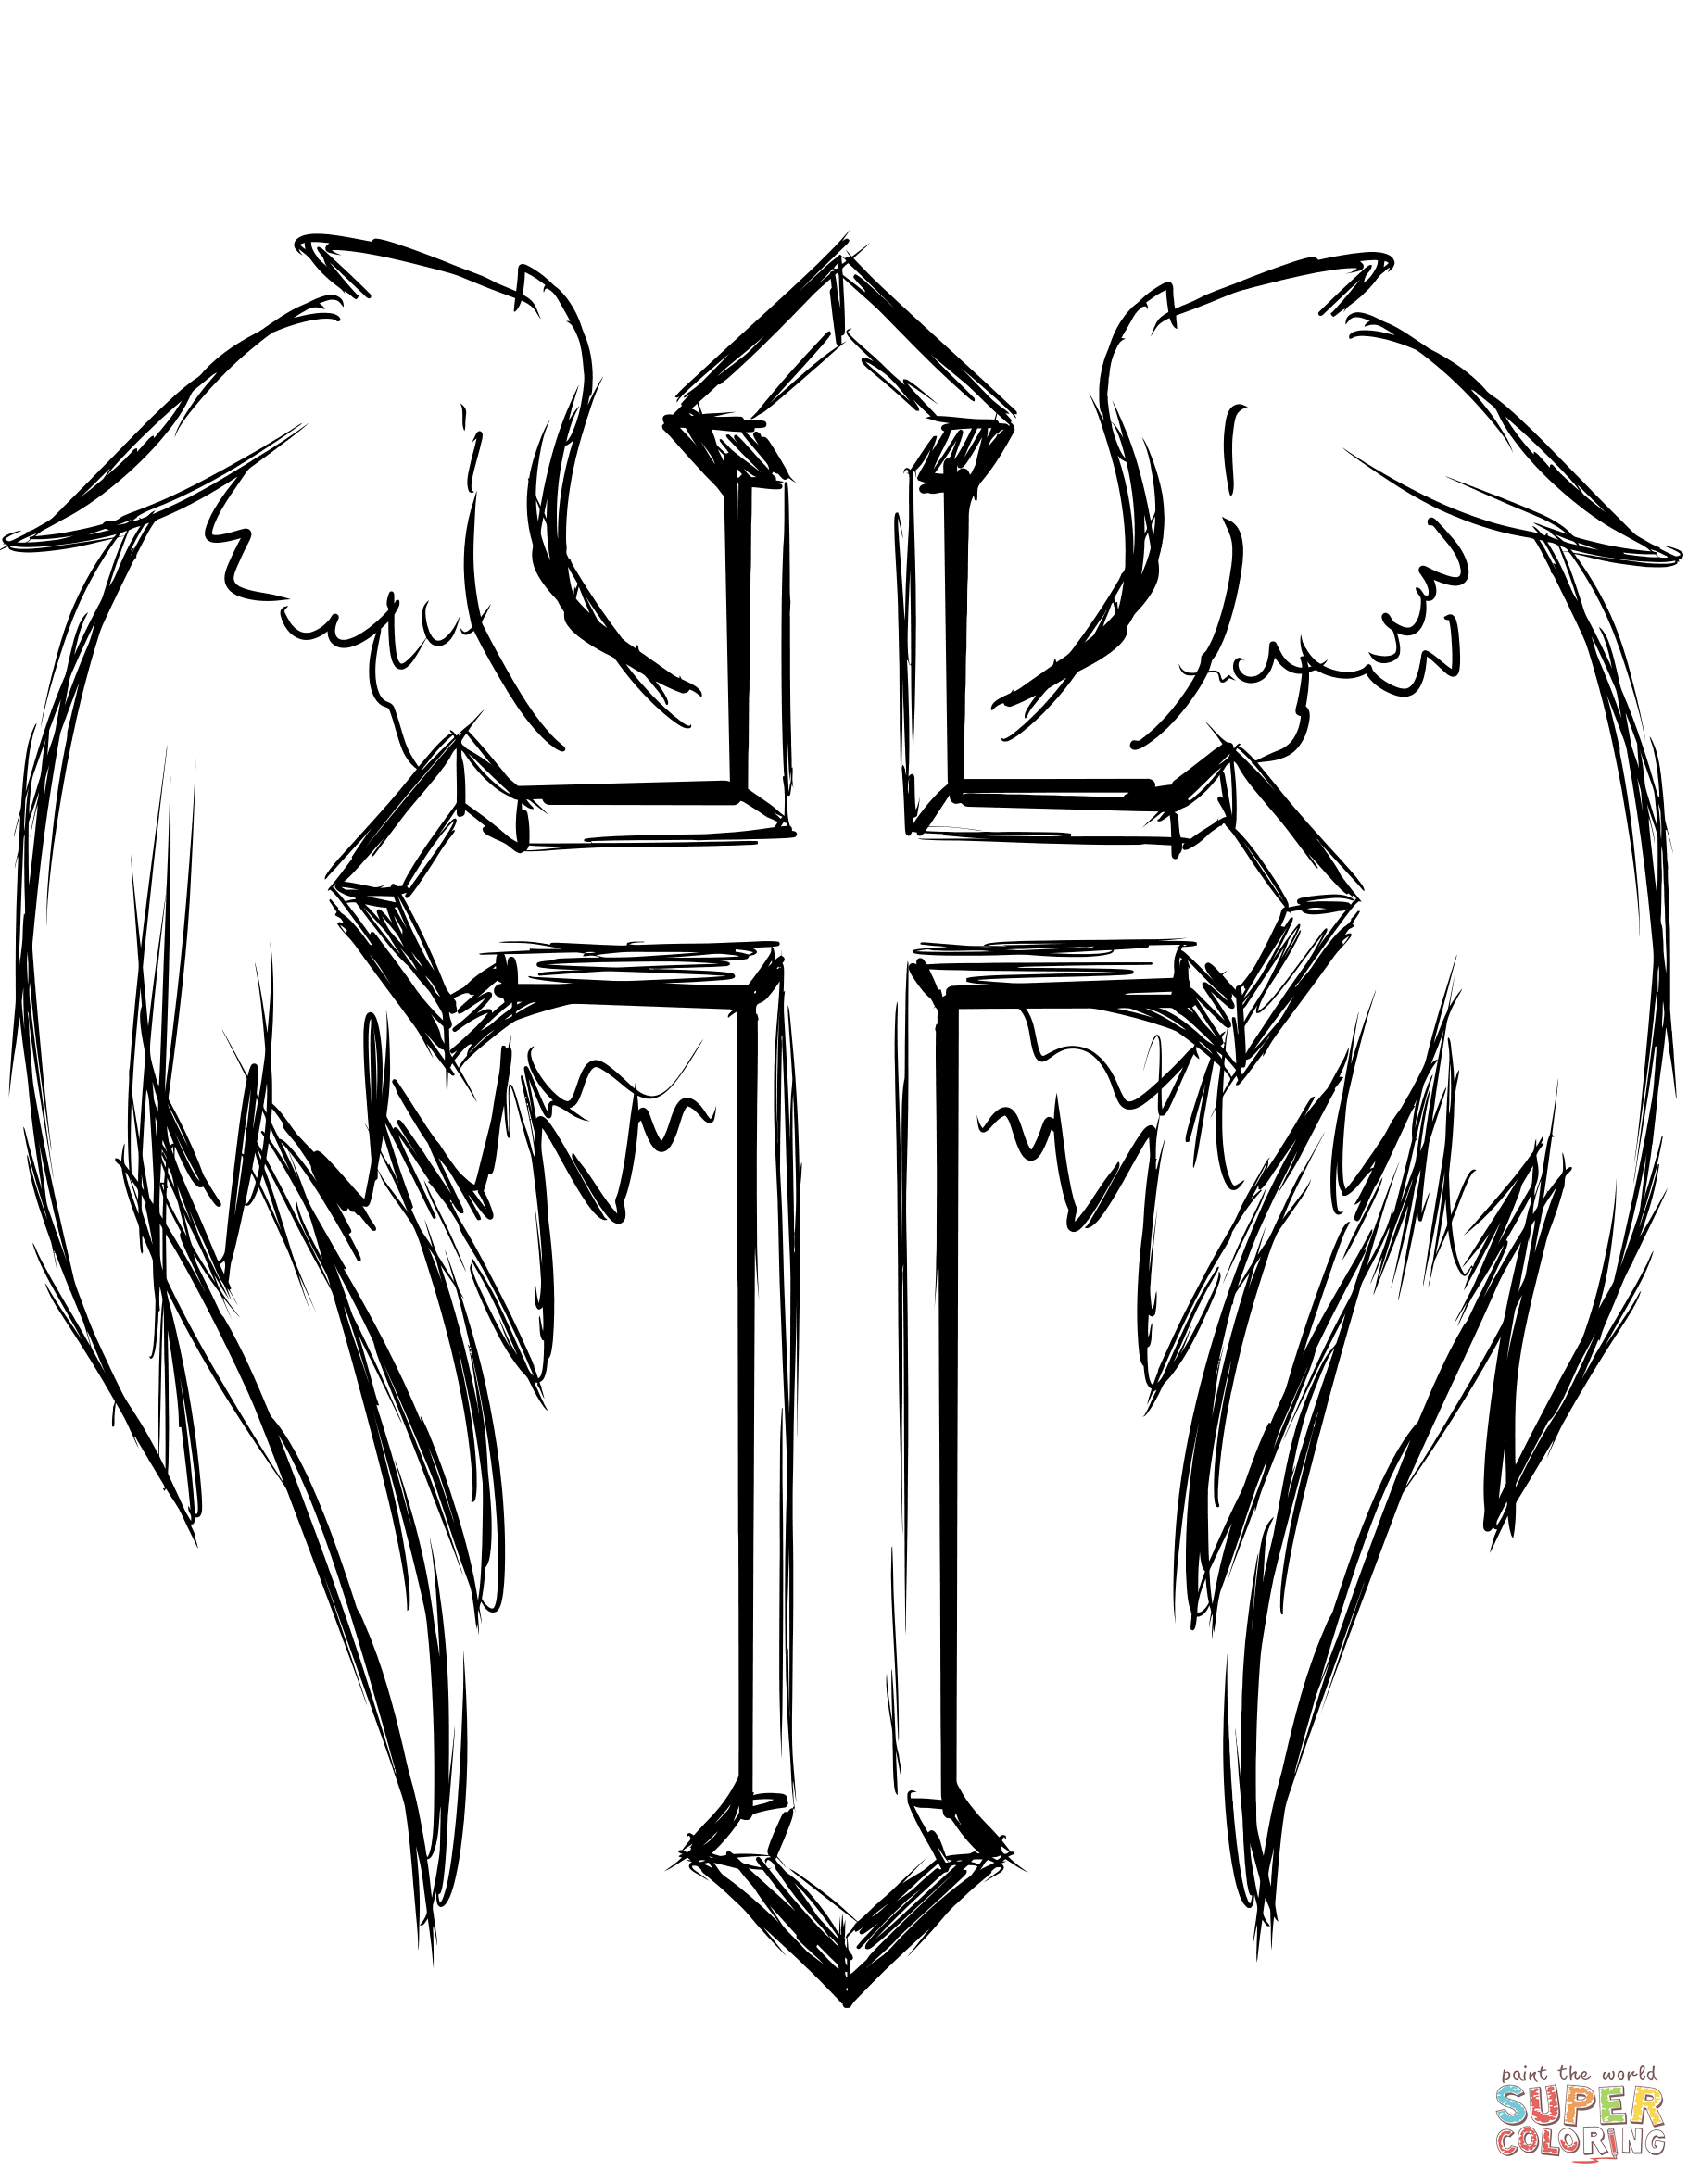 Cross Coloring Pages - ivanvalencia.co